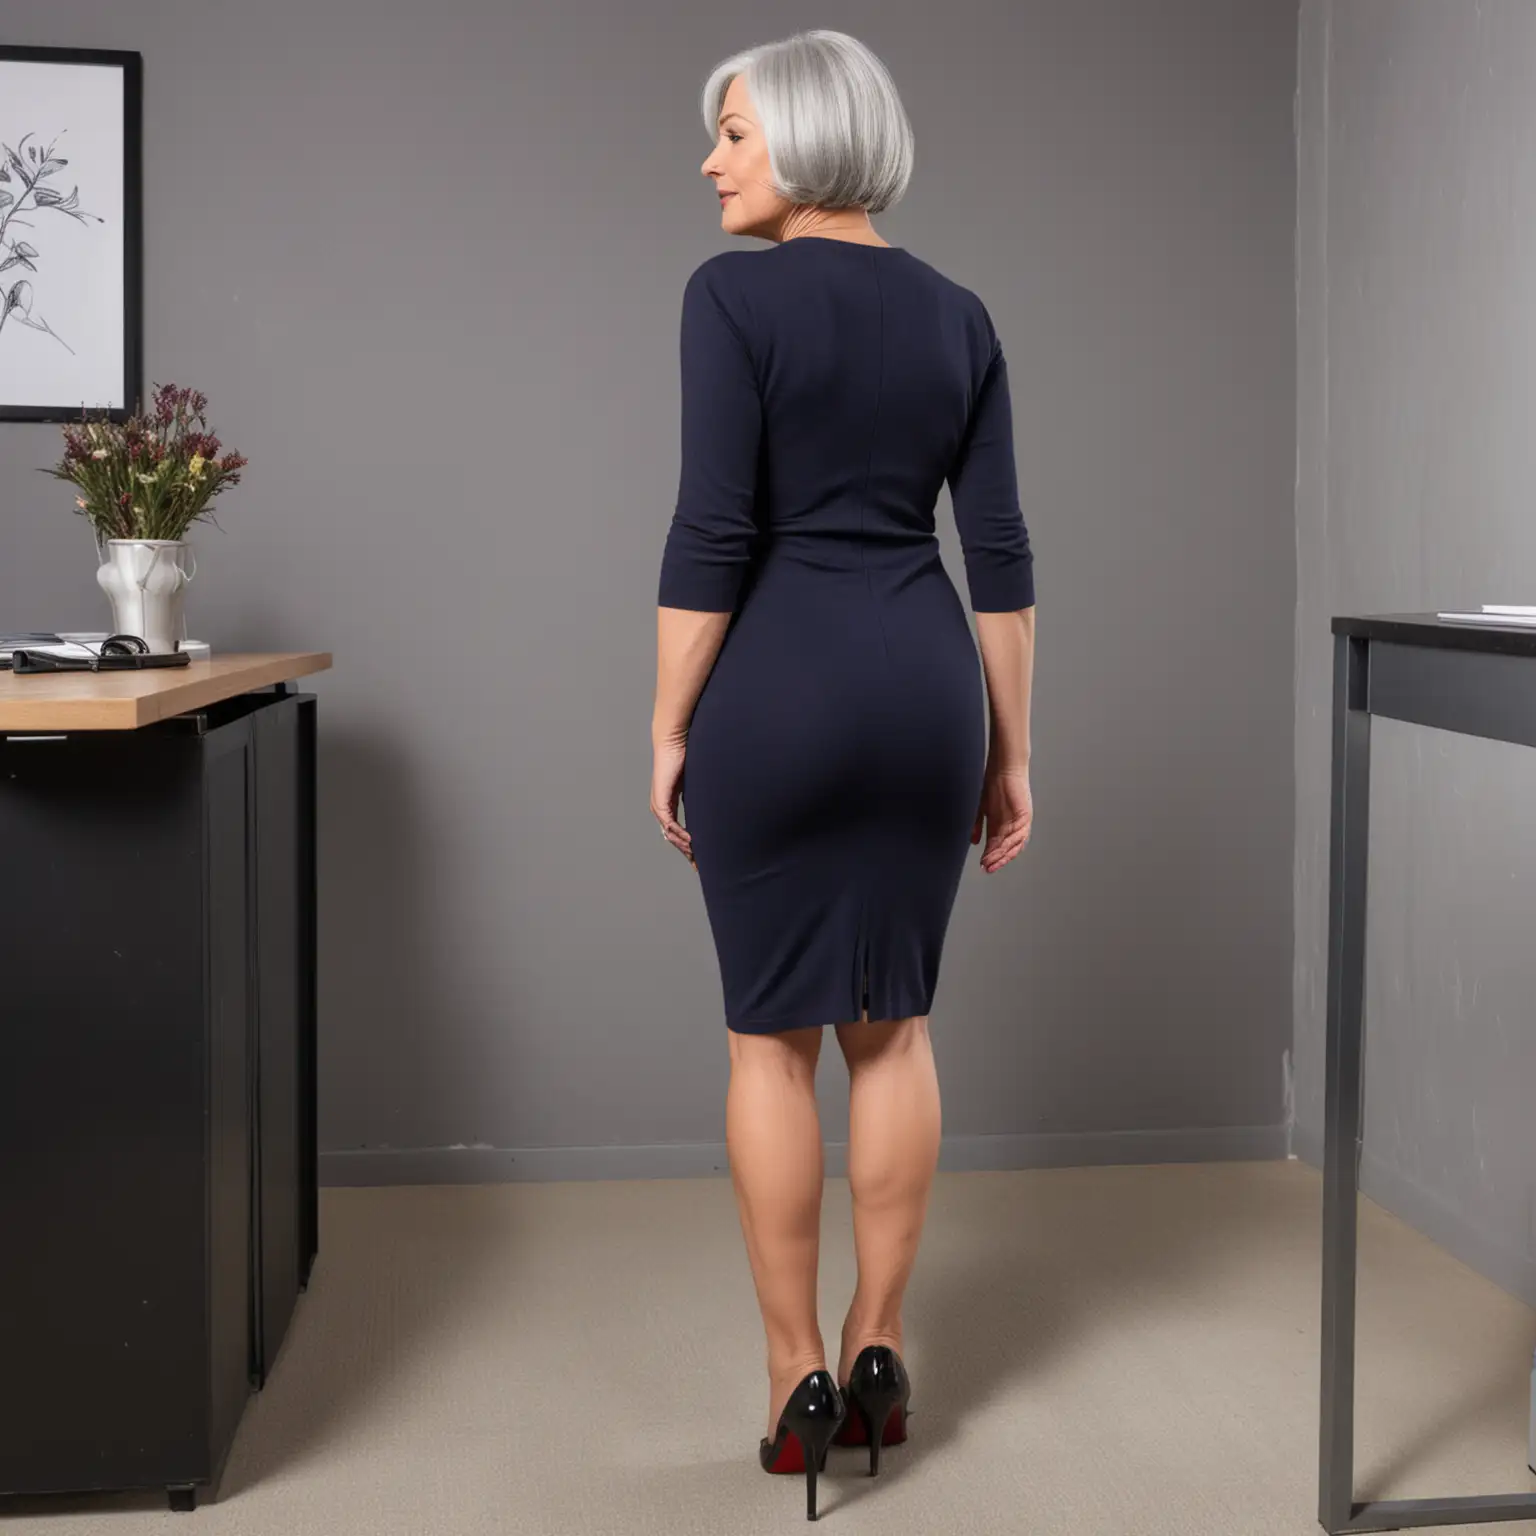 Elegant Mature Woman in Navy Dress and Stilettos at Office